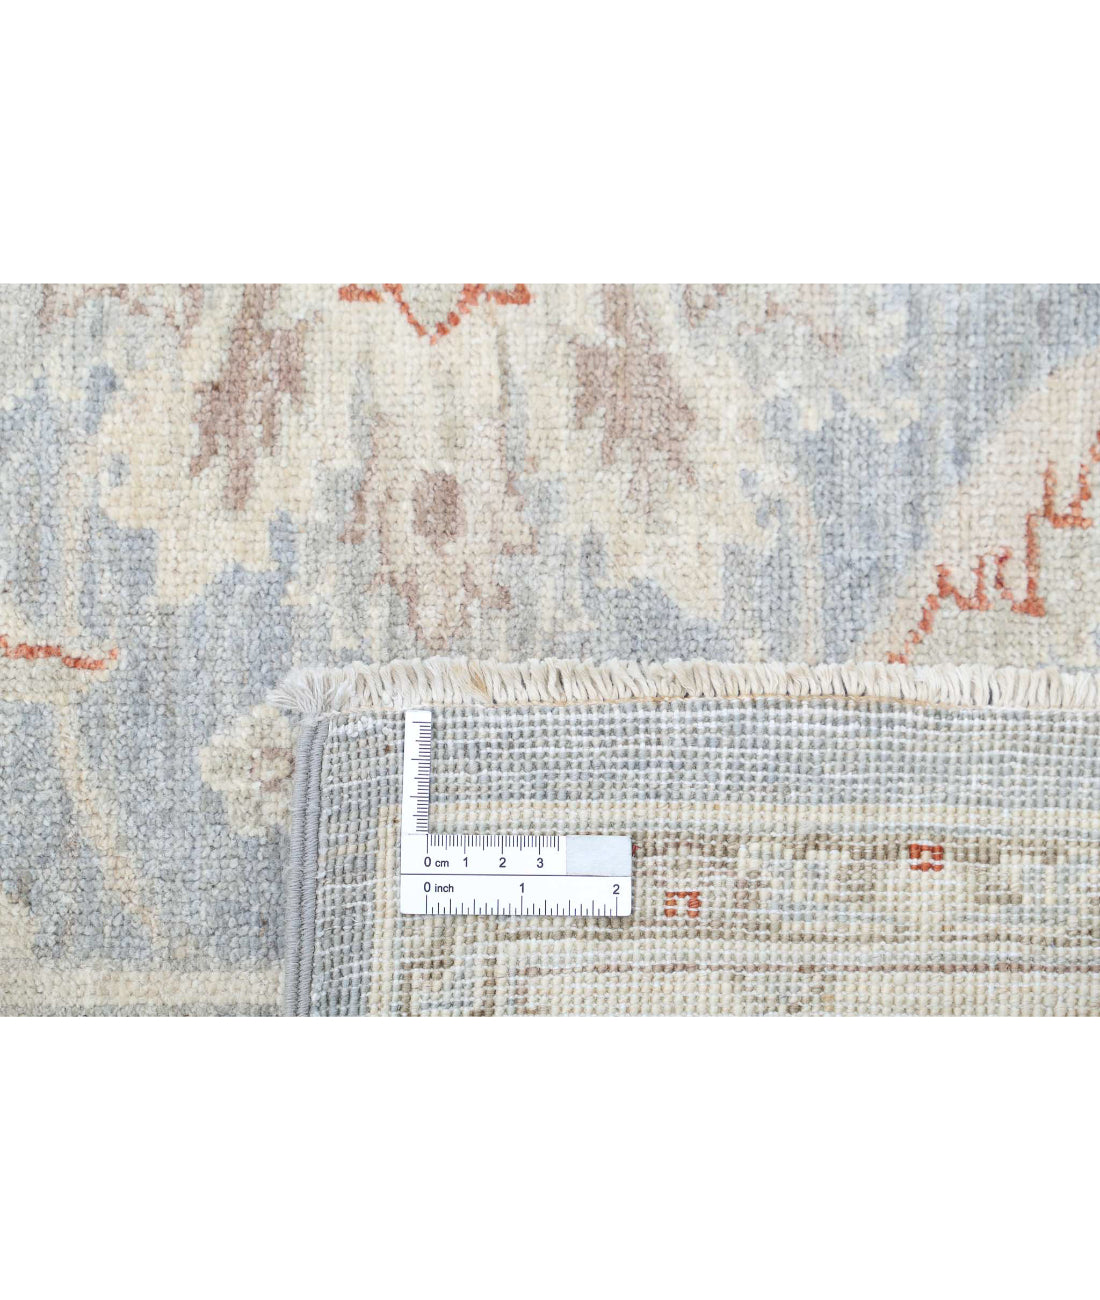 Serenity 3'10'' X 12'6'' Hand-Knotted Wool Rug 3'10'' x 12'6'' (115 X 375) / Grey / Ivory